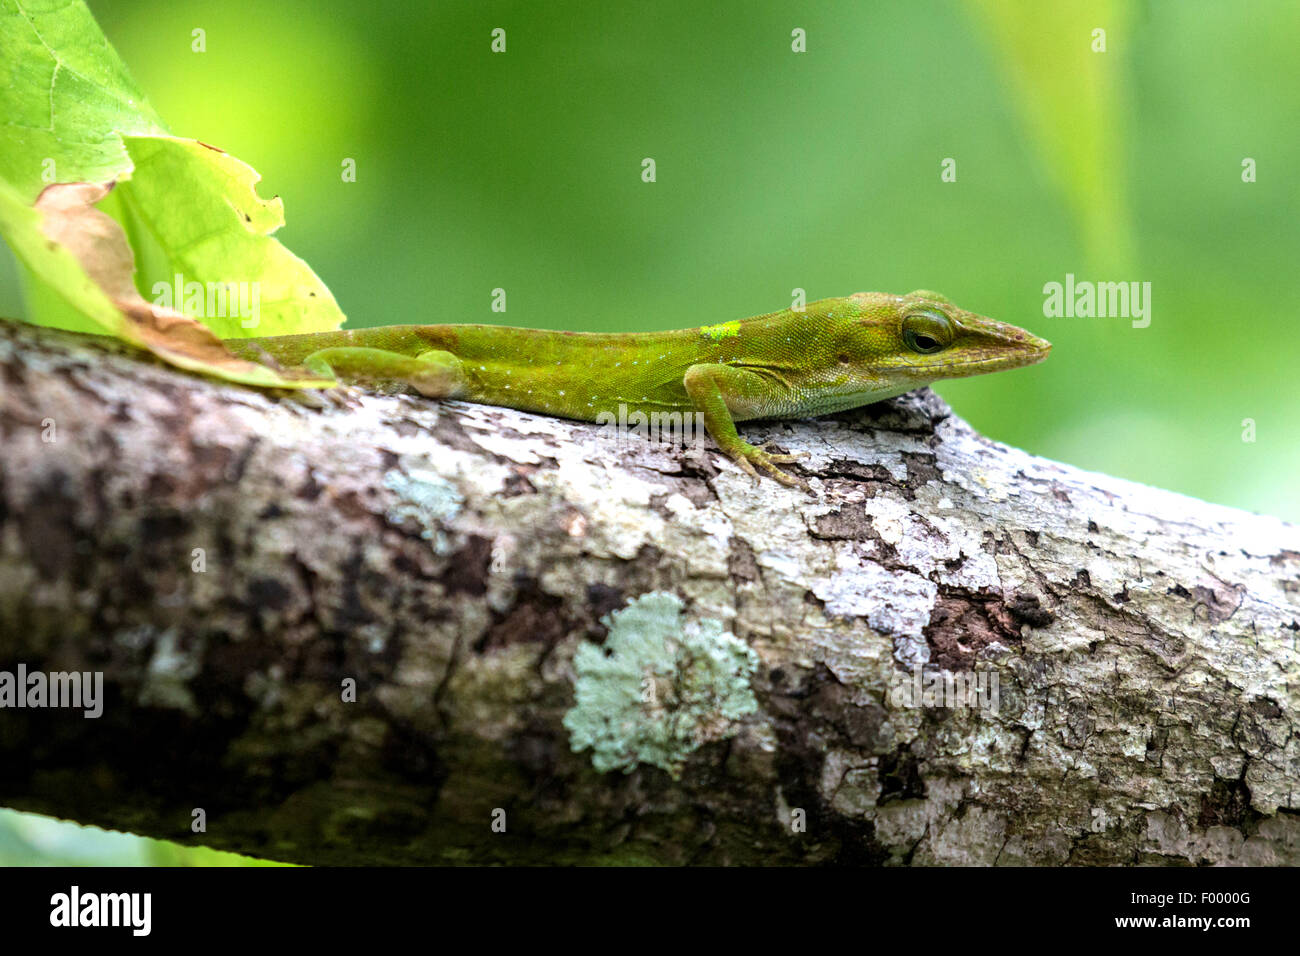 green anole (Anolis carolinensis), change of colour from green to brown, sitting on a branch, USA, Florida Stock Photo